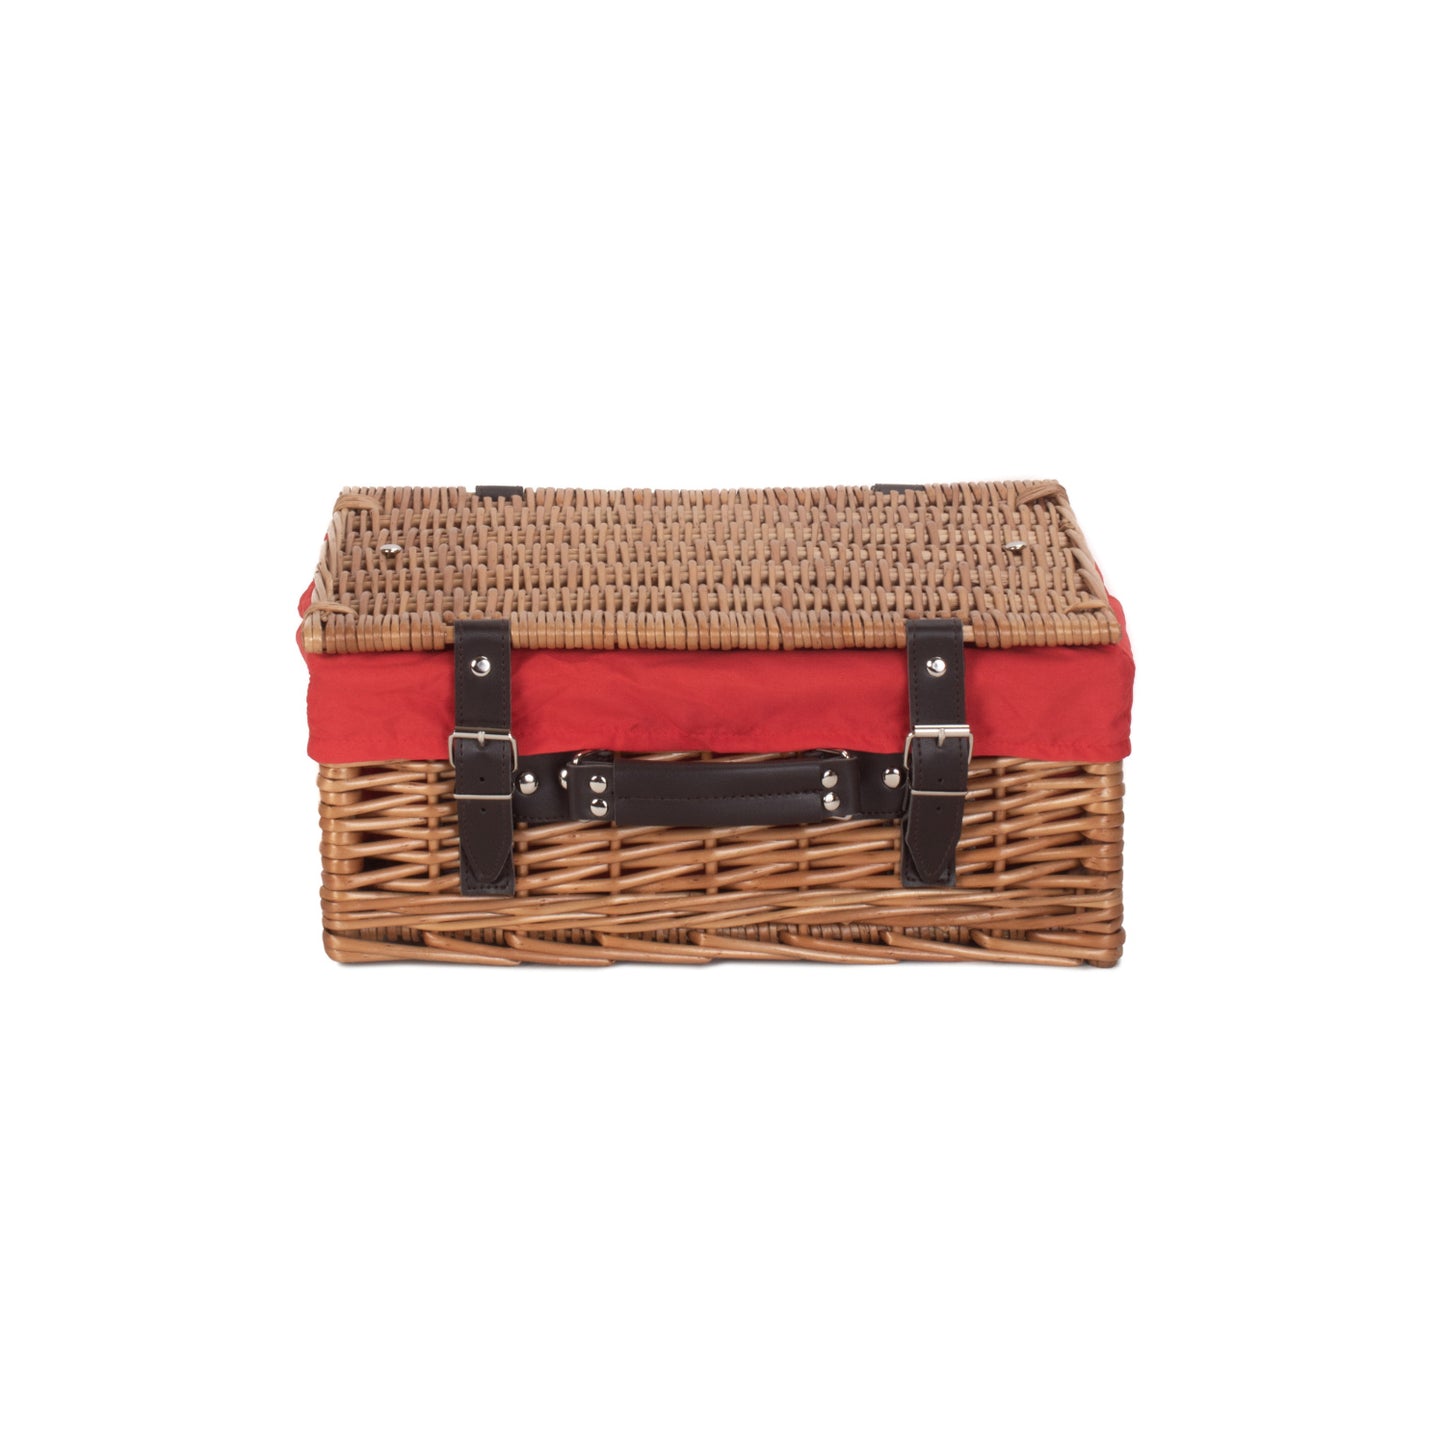 14 Inch Double Steamed Hamper With Red Lining